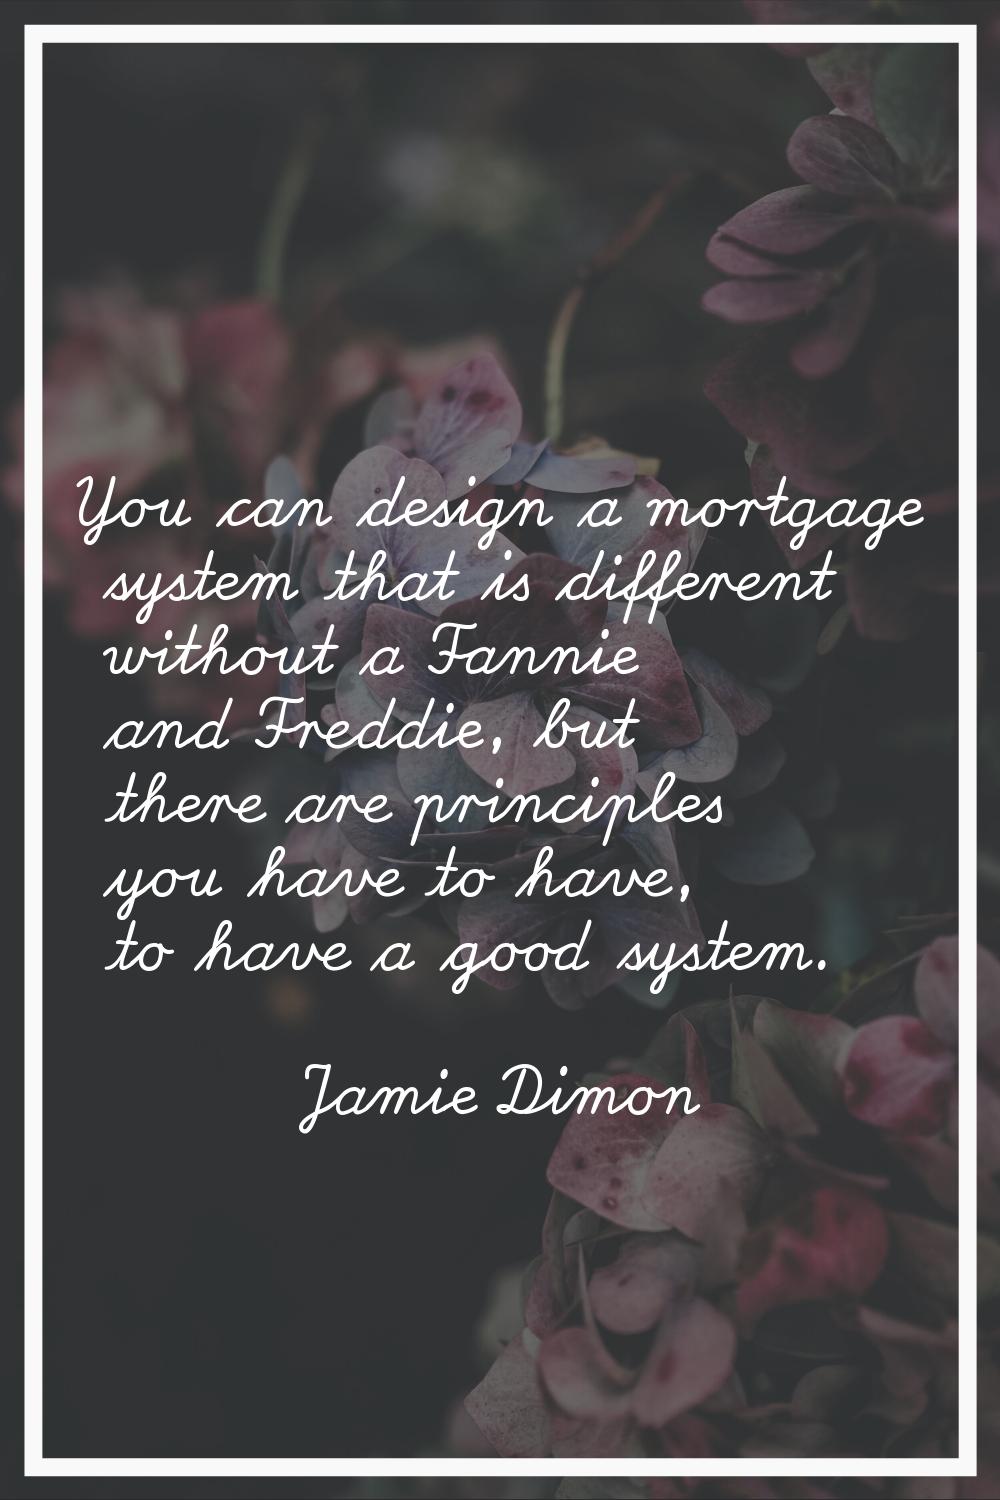 You can design a mortgage system that is different without a Fannie and Freddie, but there are prin